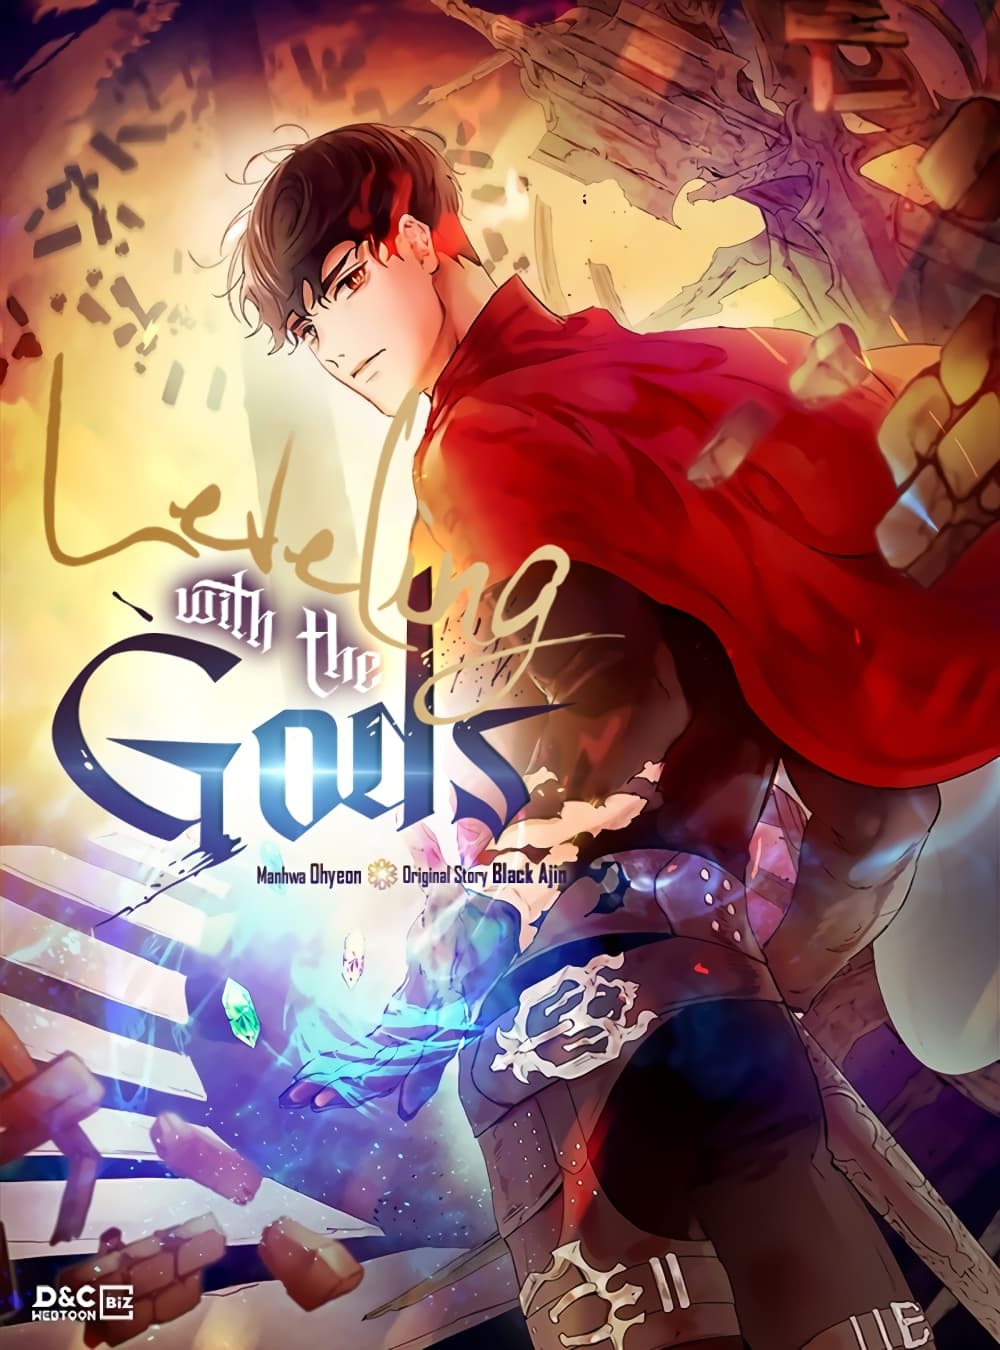 Leveling With The Gods12 (1)